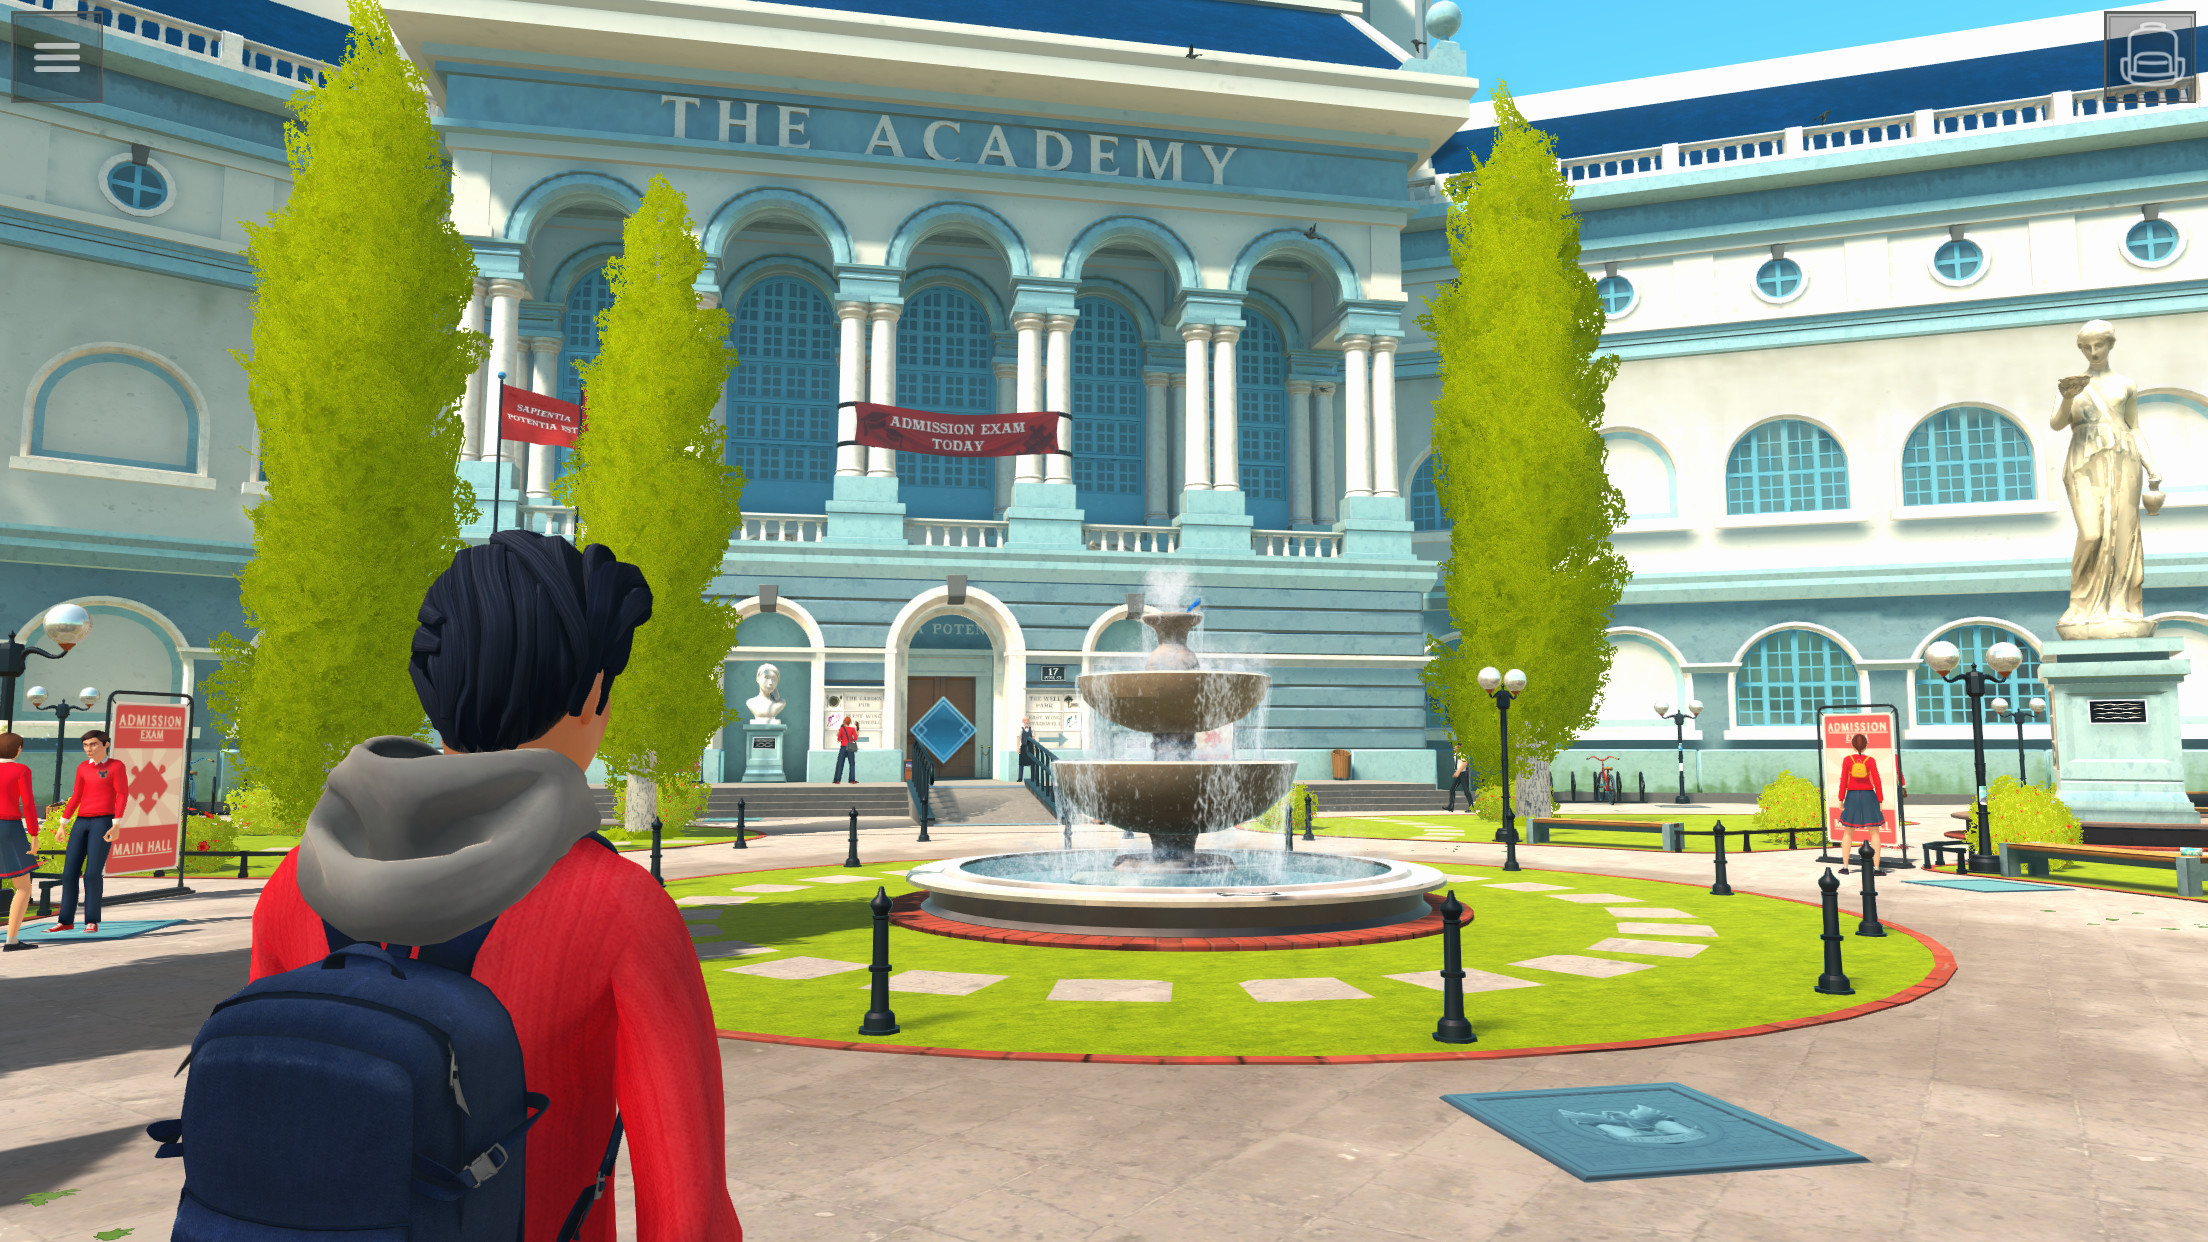 The academy player. Academy игра. The Academy the first Riddle (2020) PC. Игра на ПК Академия. Игра на ПК Академия магии.